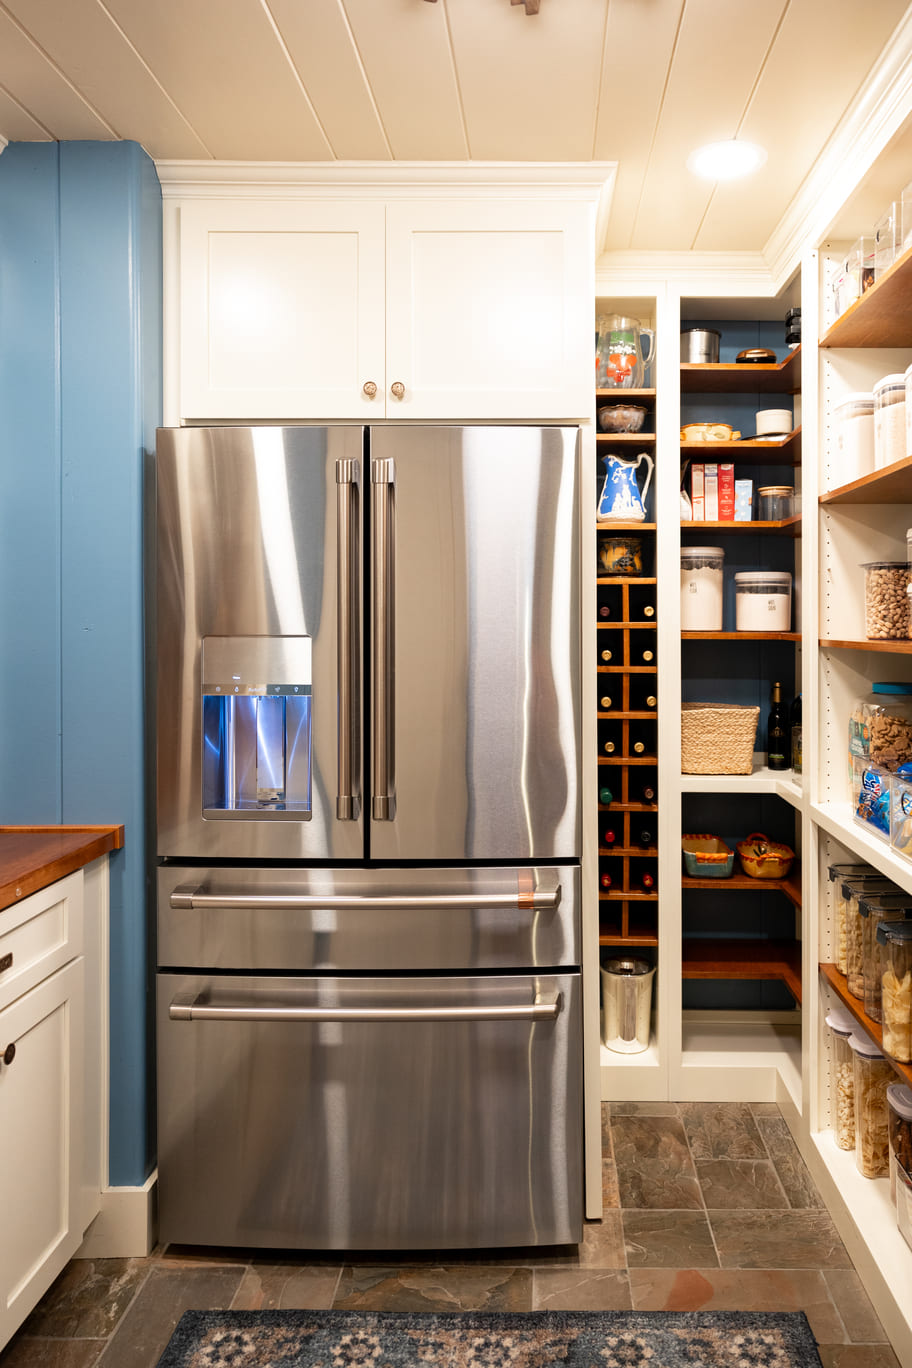 Refrigerator in kitchen with white custom shelving and storage areas with light blue walls